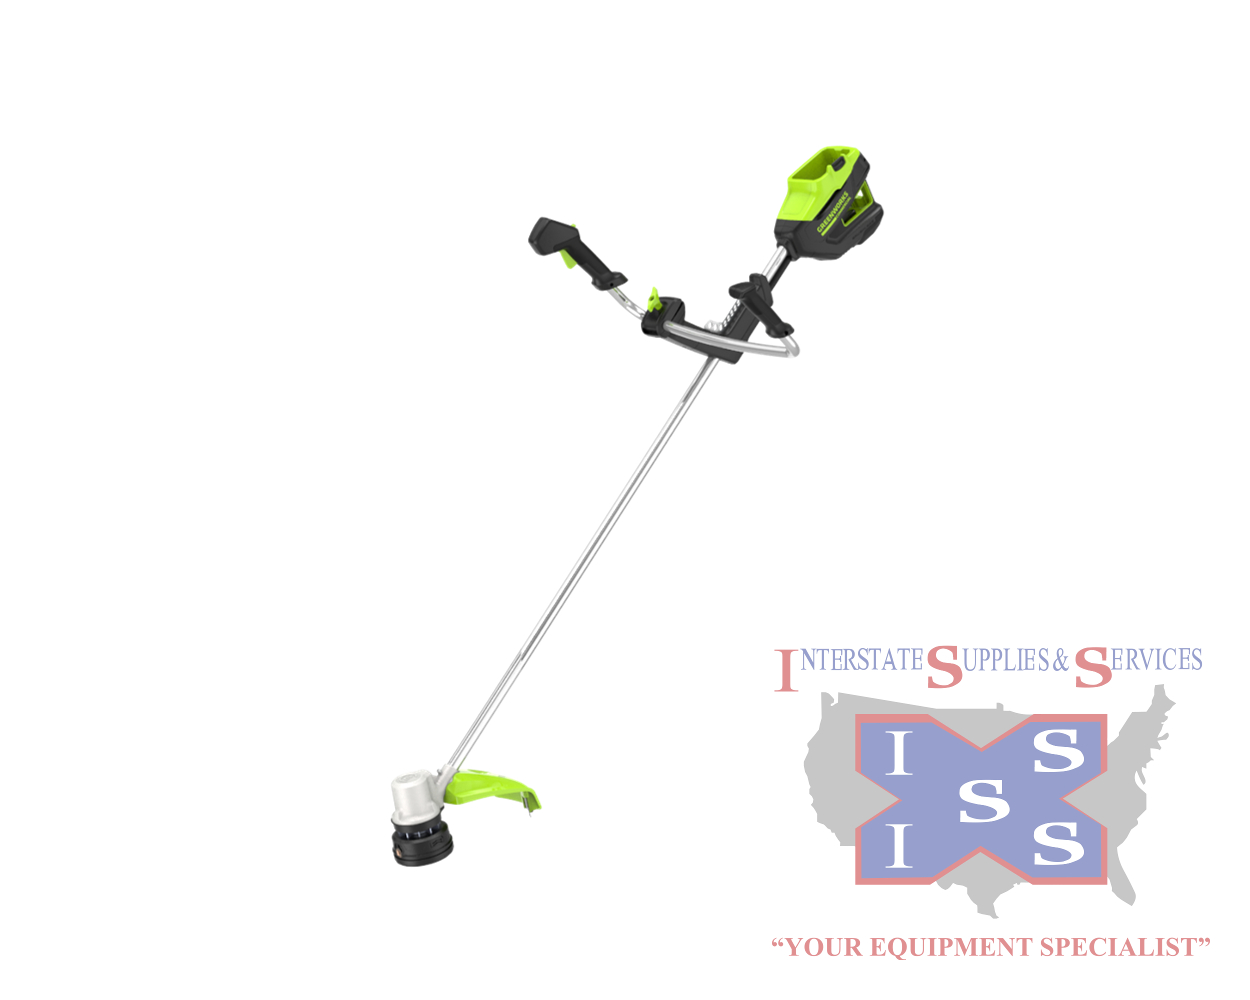 82TB20 82 Volt Gen II Bike Handle String Trimmer (Tool Only) - C - Click Image to Close